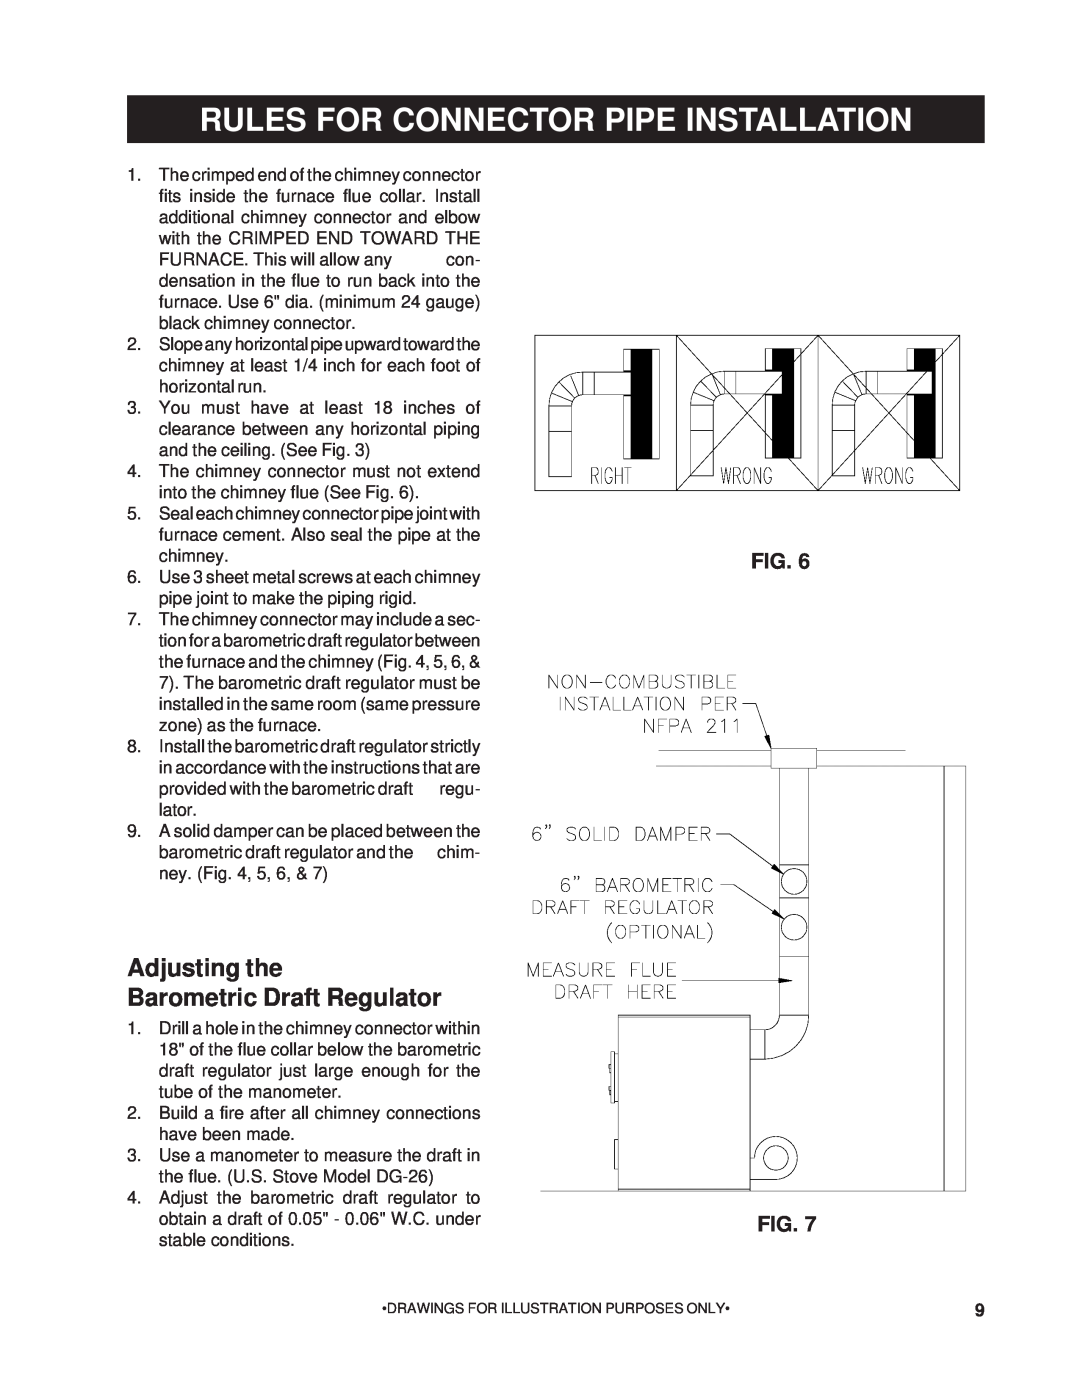 United States Stove 1200Q Rules For Connector Pipe Installation, Adjusting the Barometric Draft Regulator, Fig. Fig 